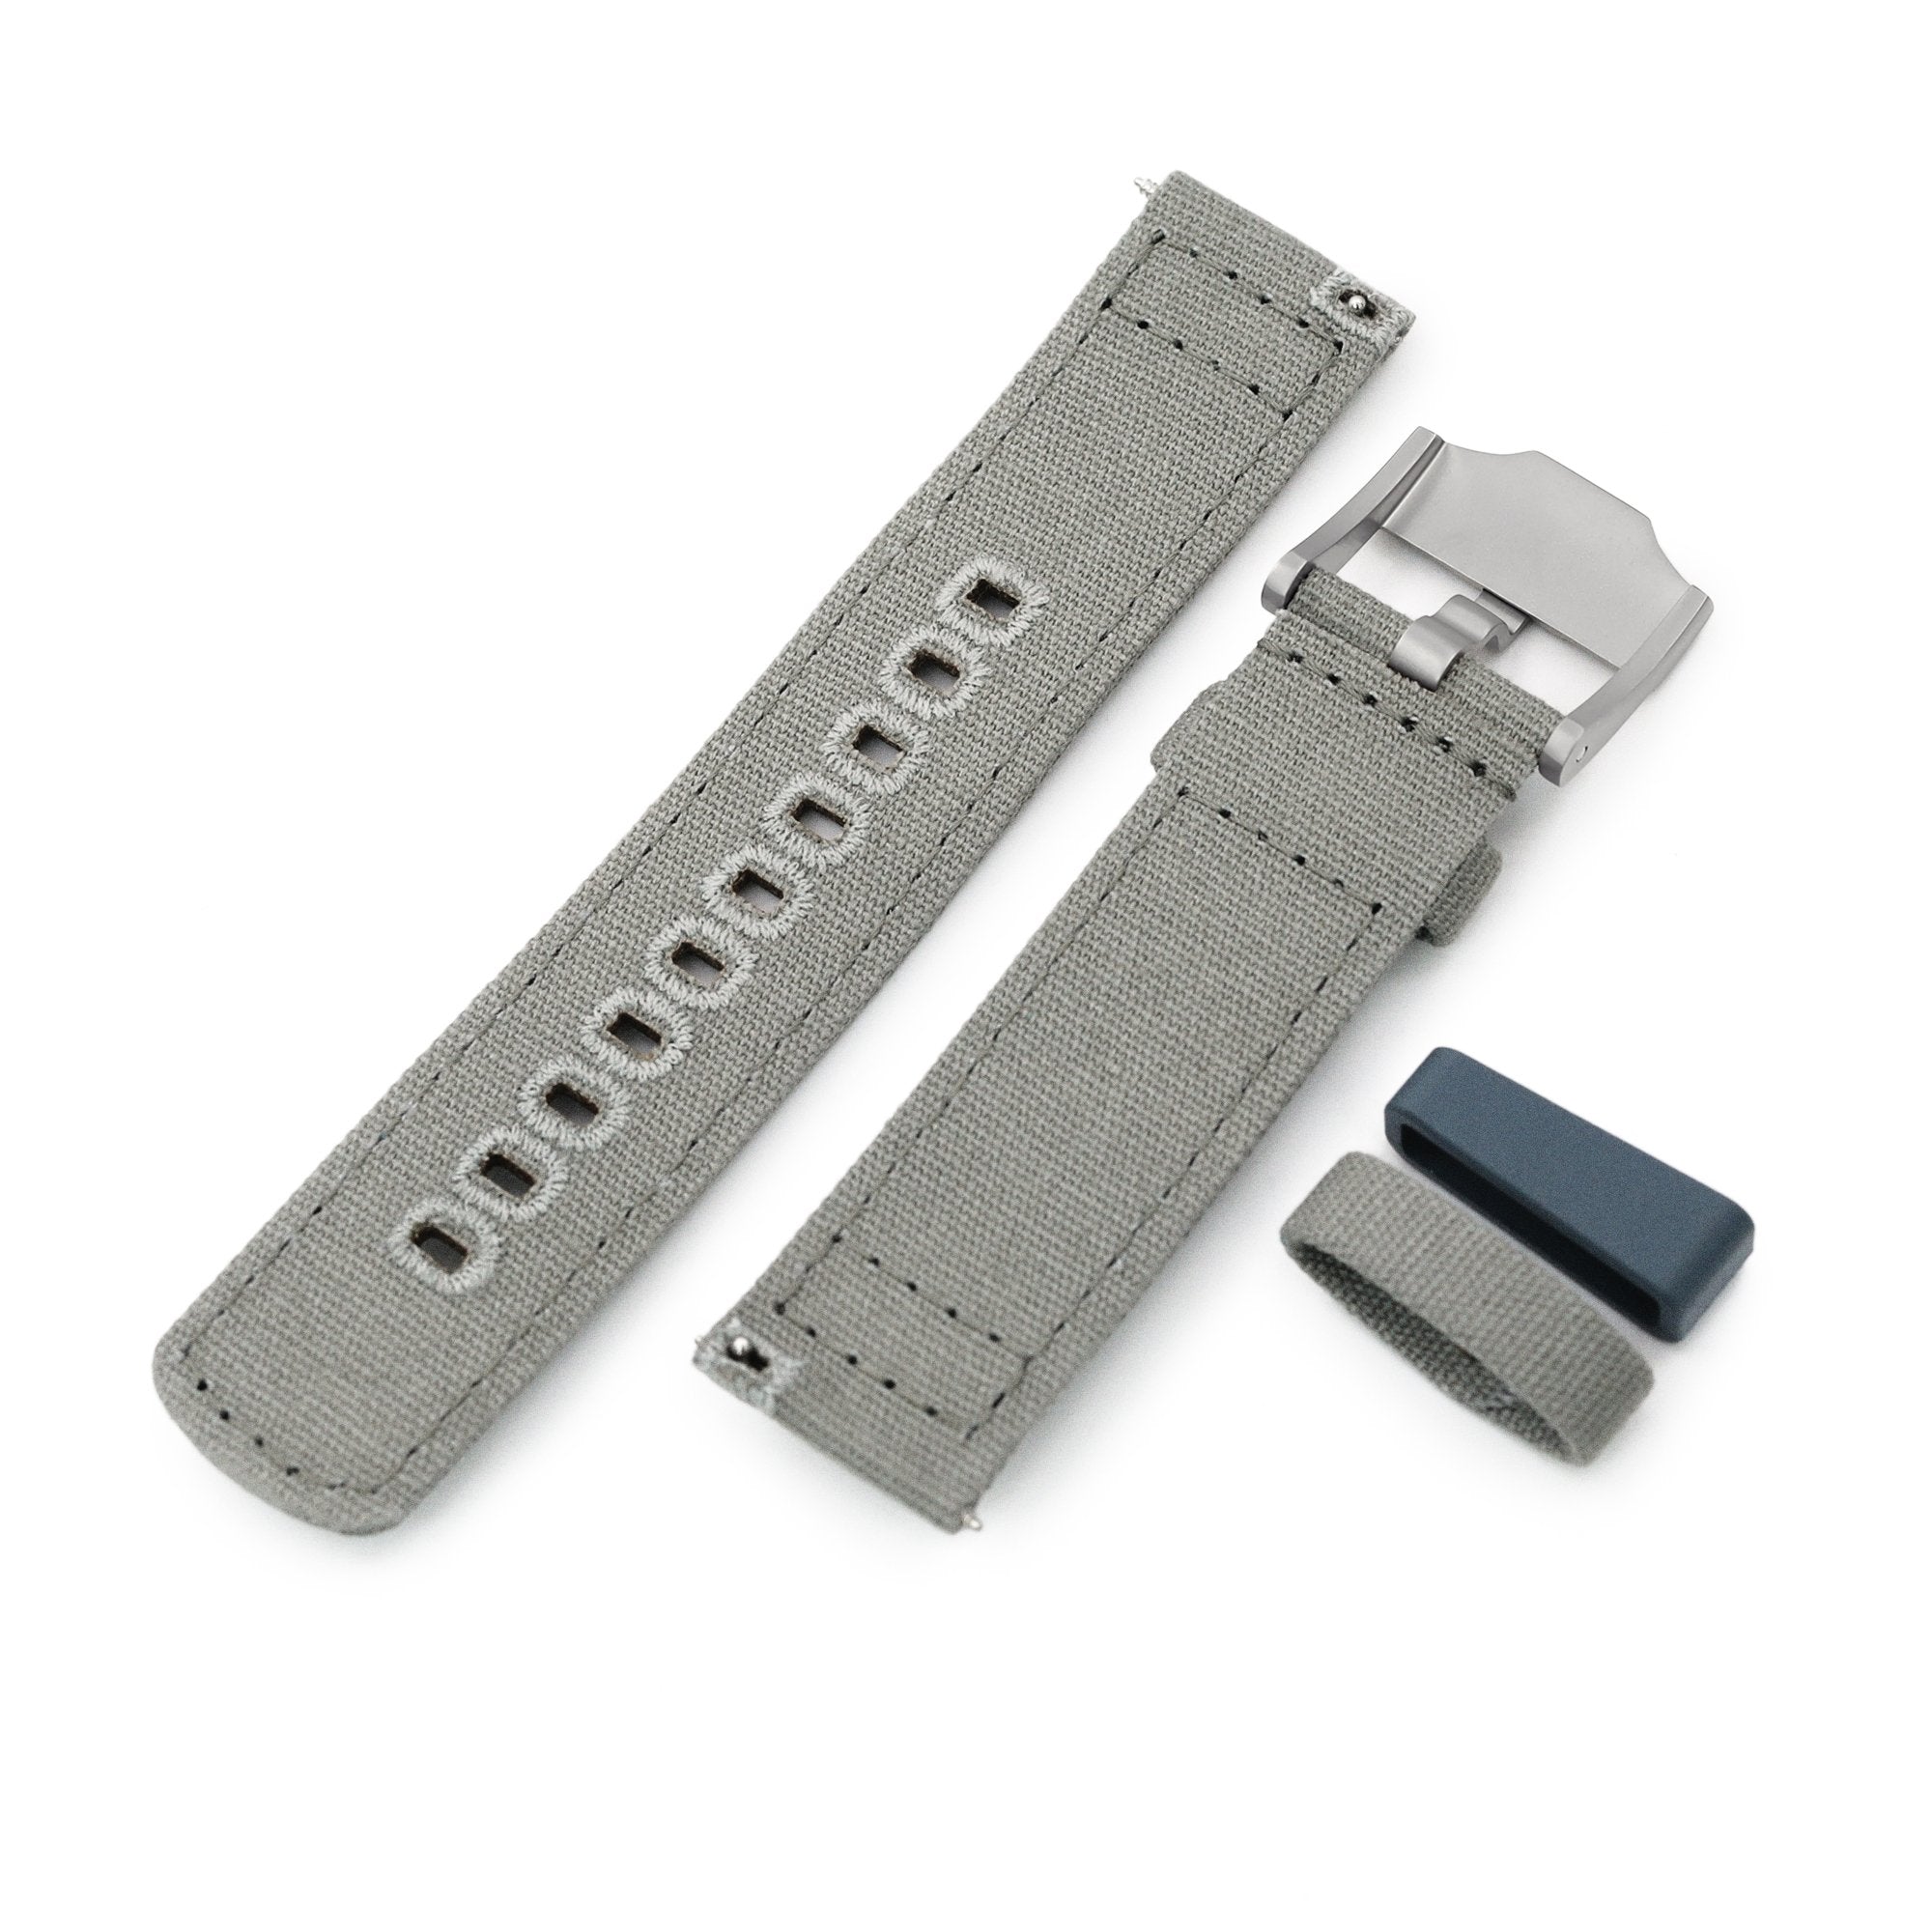 Khaki Green Quick Release Canvas Watch Strap 22mm or 20mm Strapcode Watch Bands